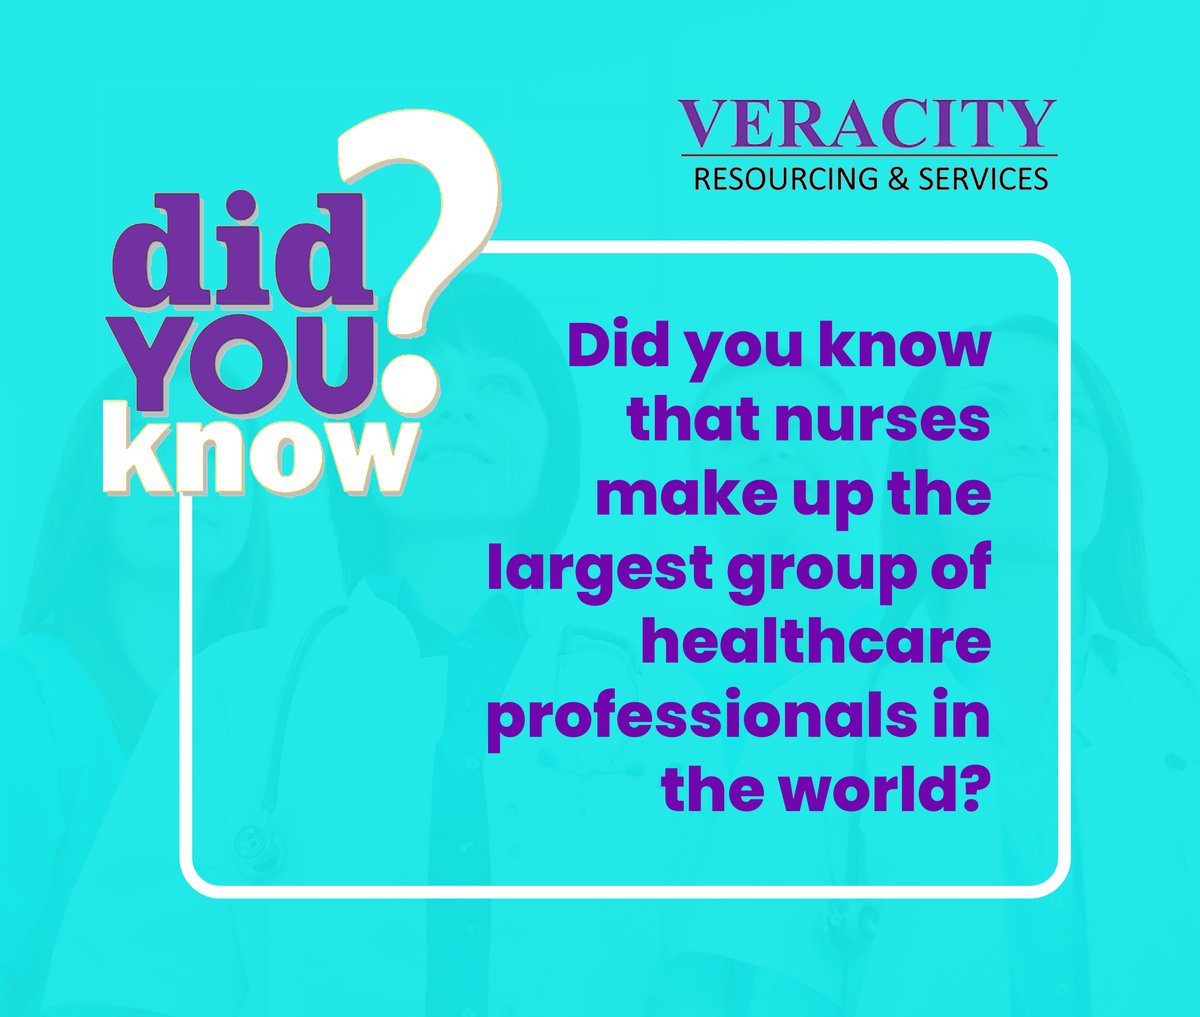 'Nurses are the backbone of every healthcare system in the world.'

#DidYouKnow #DidYouKnowThis #didyouknowthat #didyouknowgram #didyouknowfacts #facts #FactsMatter #factsoflife #teamwork #teambuilding #USA #usanews #USAToday #healthcare #medical #medicalstudent #nurse #nurses